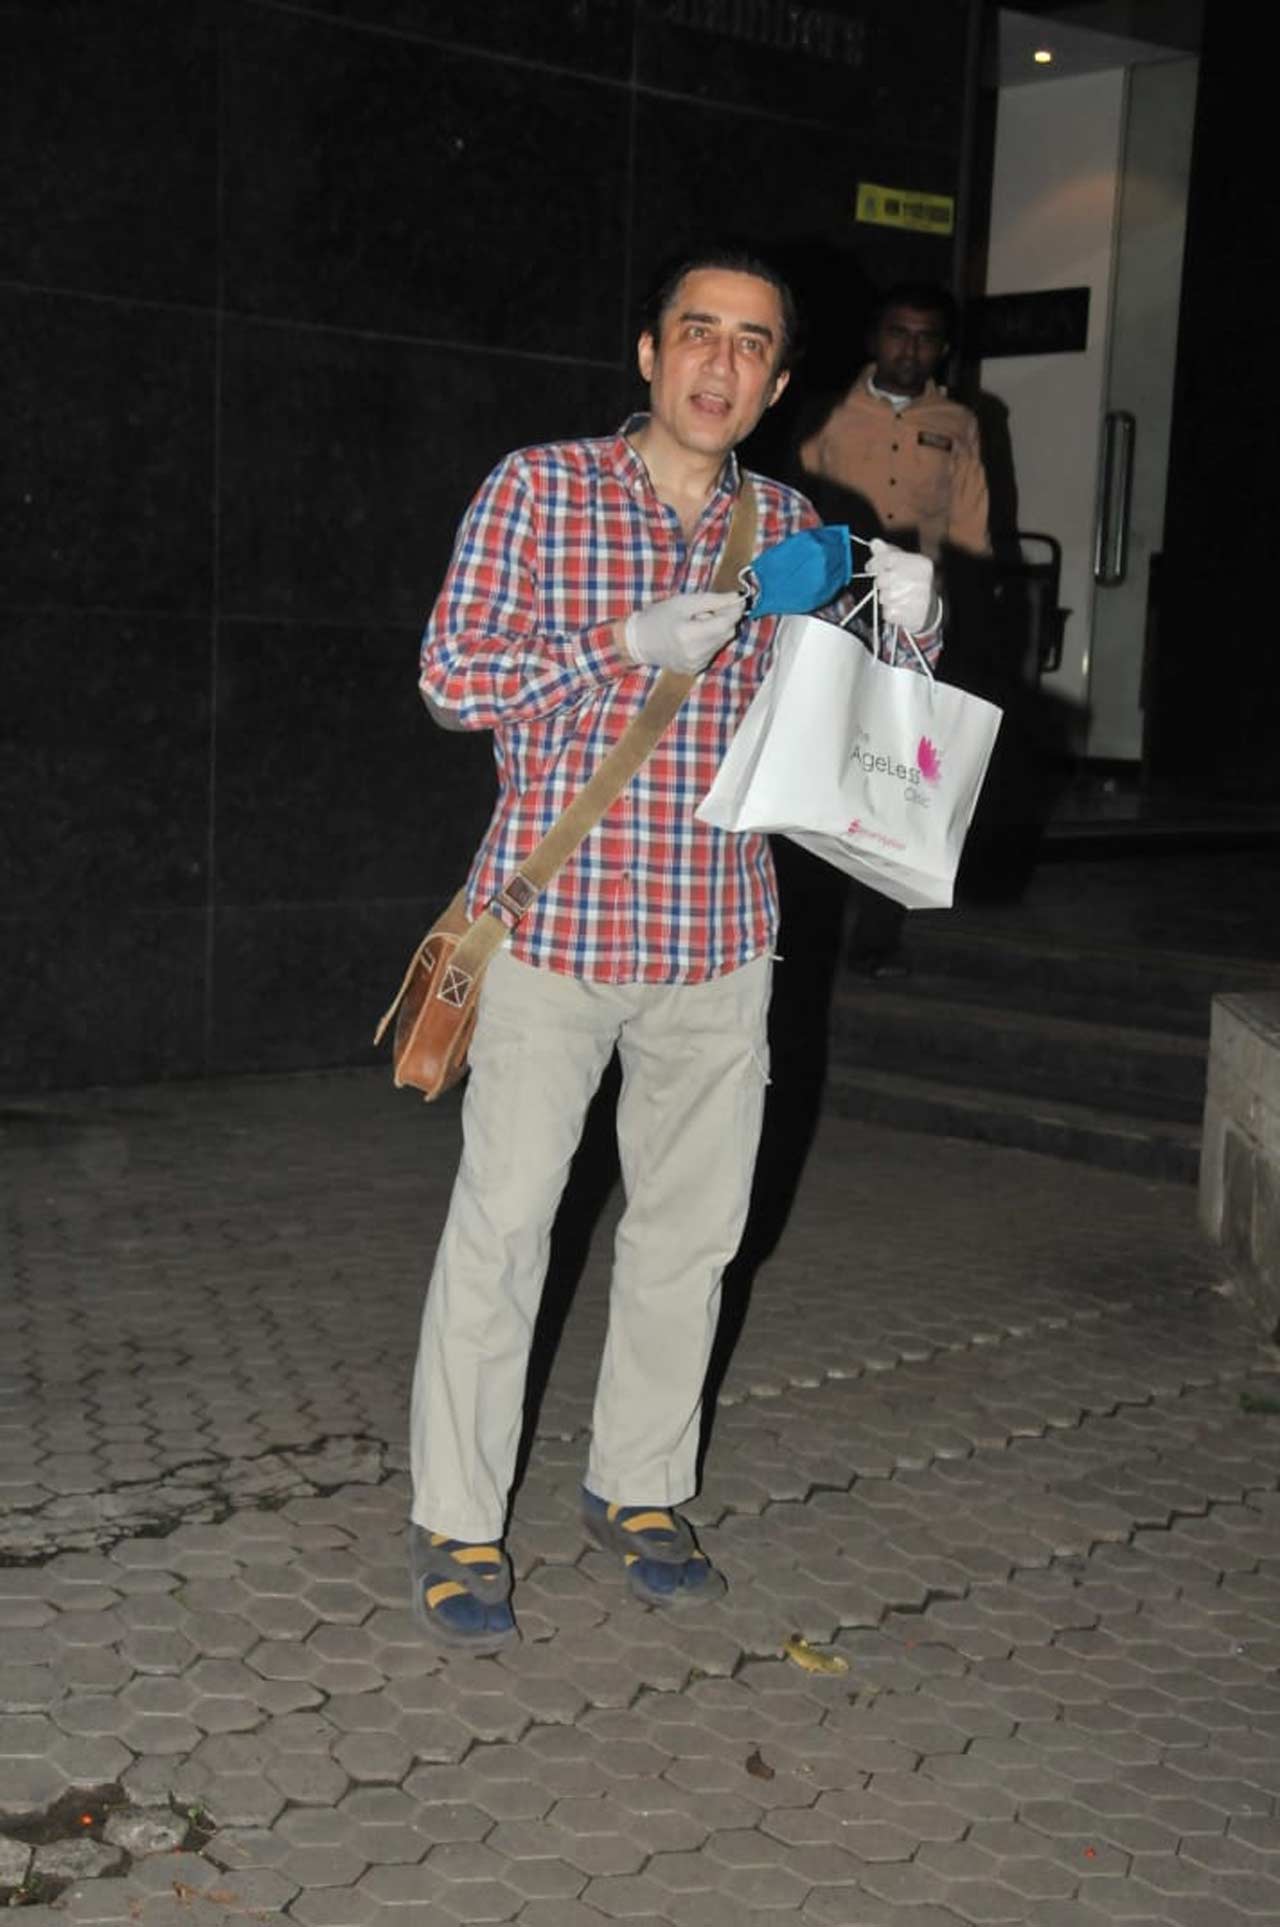 Aamir Khan's brother Faisal Khan was also snapped in Mumbai.